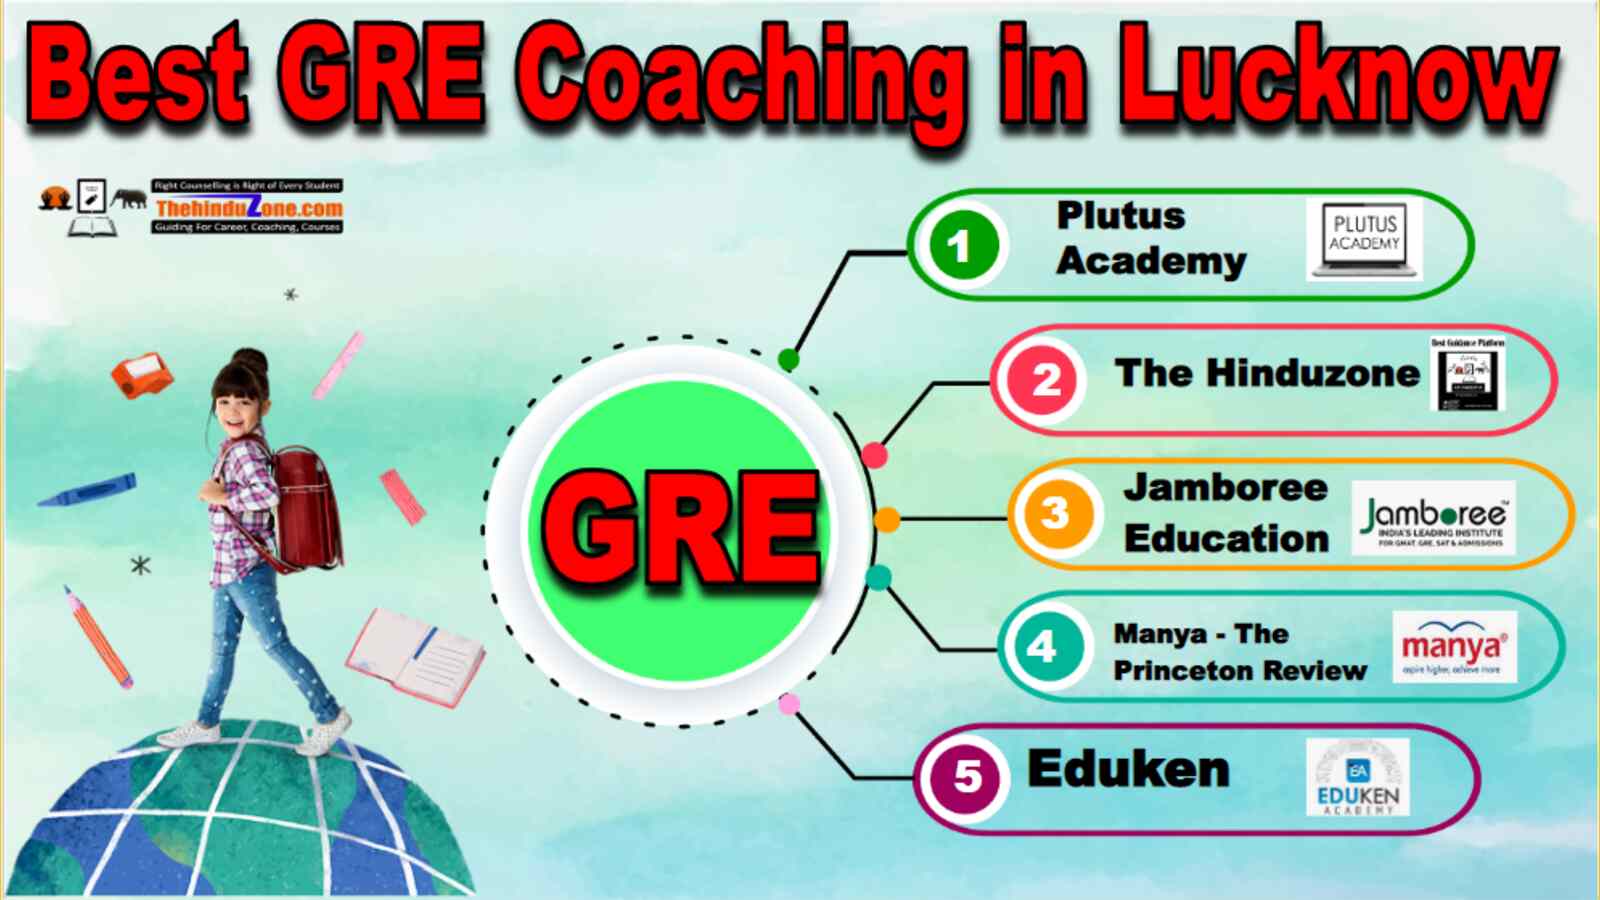 Best GRE Coaching In Lucknow